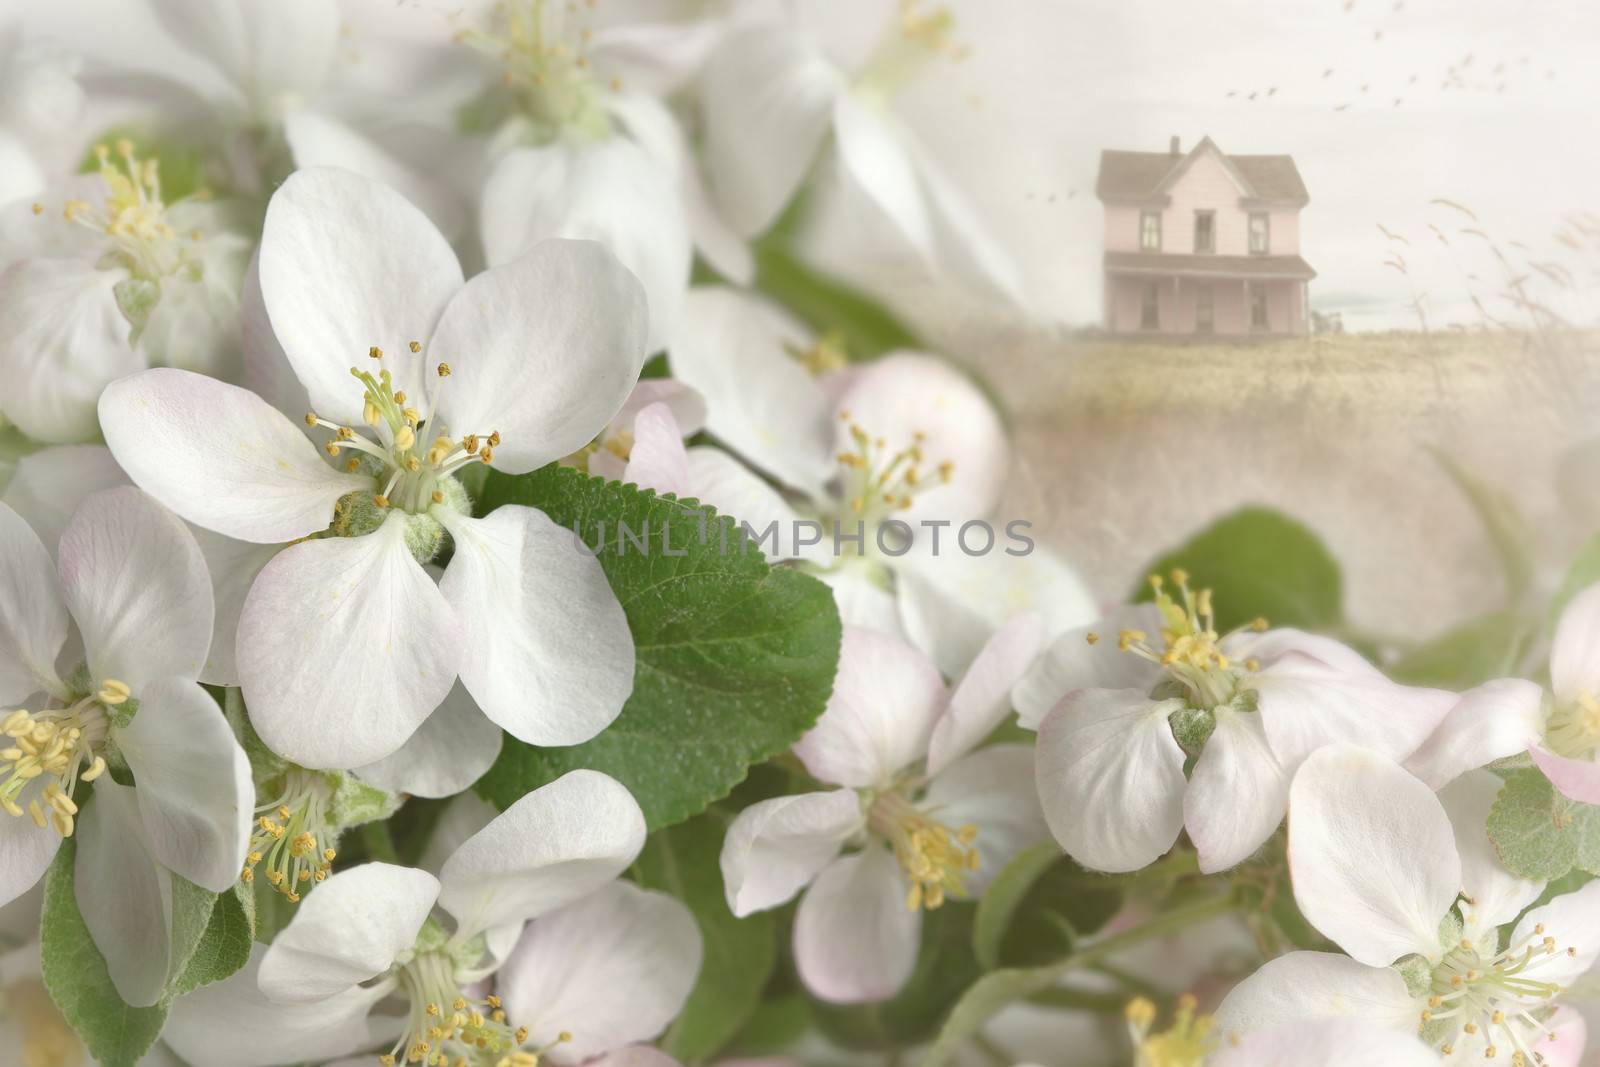 Apple blossoms with farm house in background